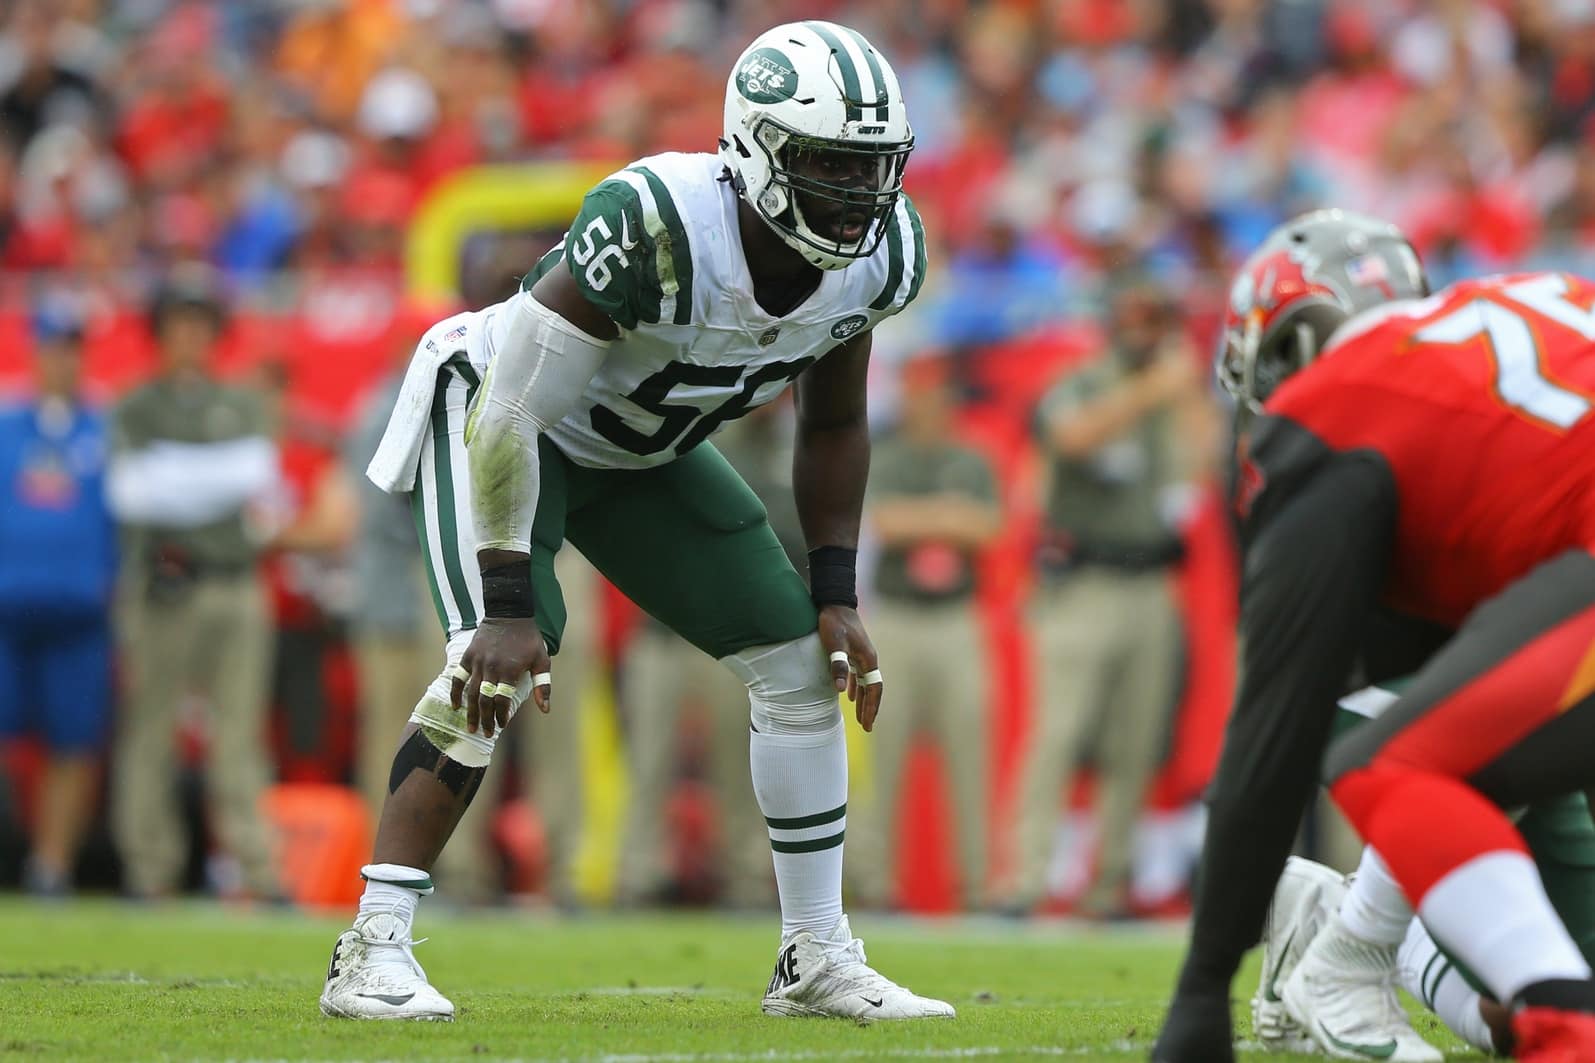 Report: Demario Davis to sign three-year, $24 million deal with Saints